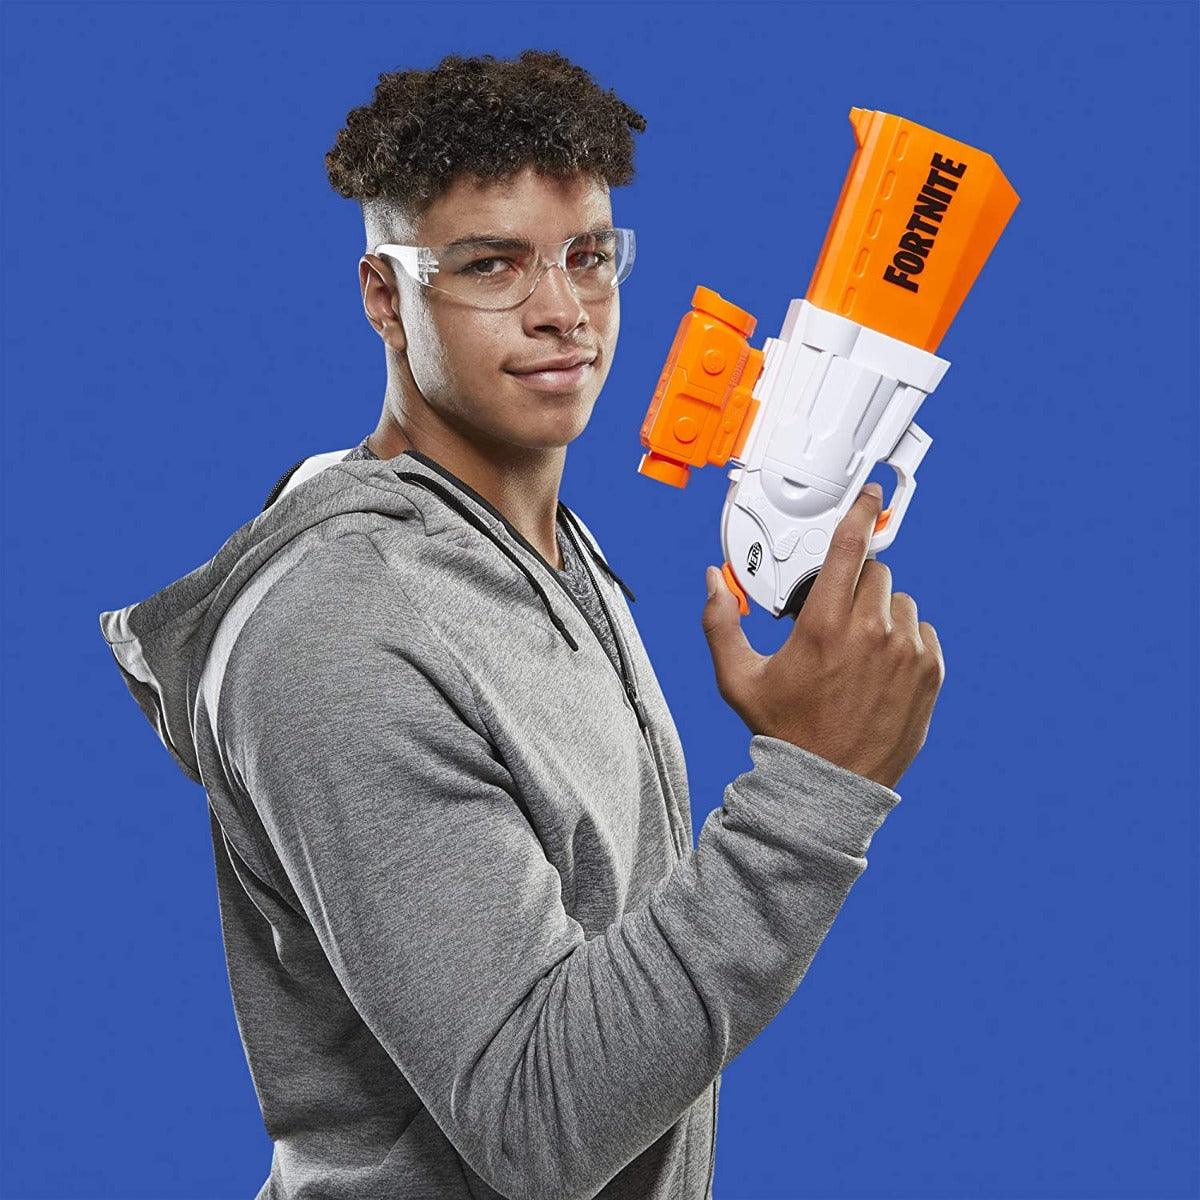 Nerf Fortnite SR Blaster, 4-Dart Hammer Action, Includes Removable Scope and 8 Elite Darts, for Youth, Teens, Adults